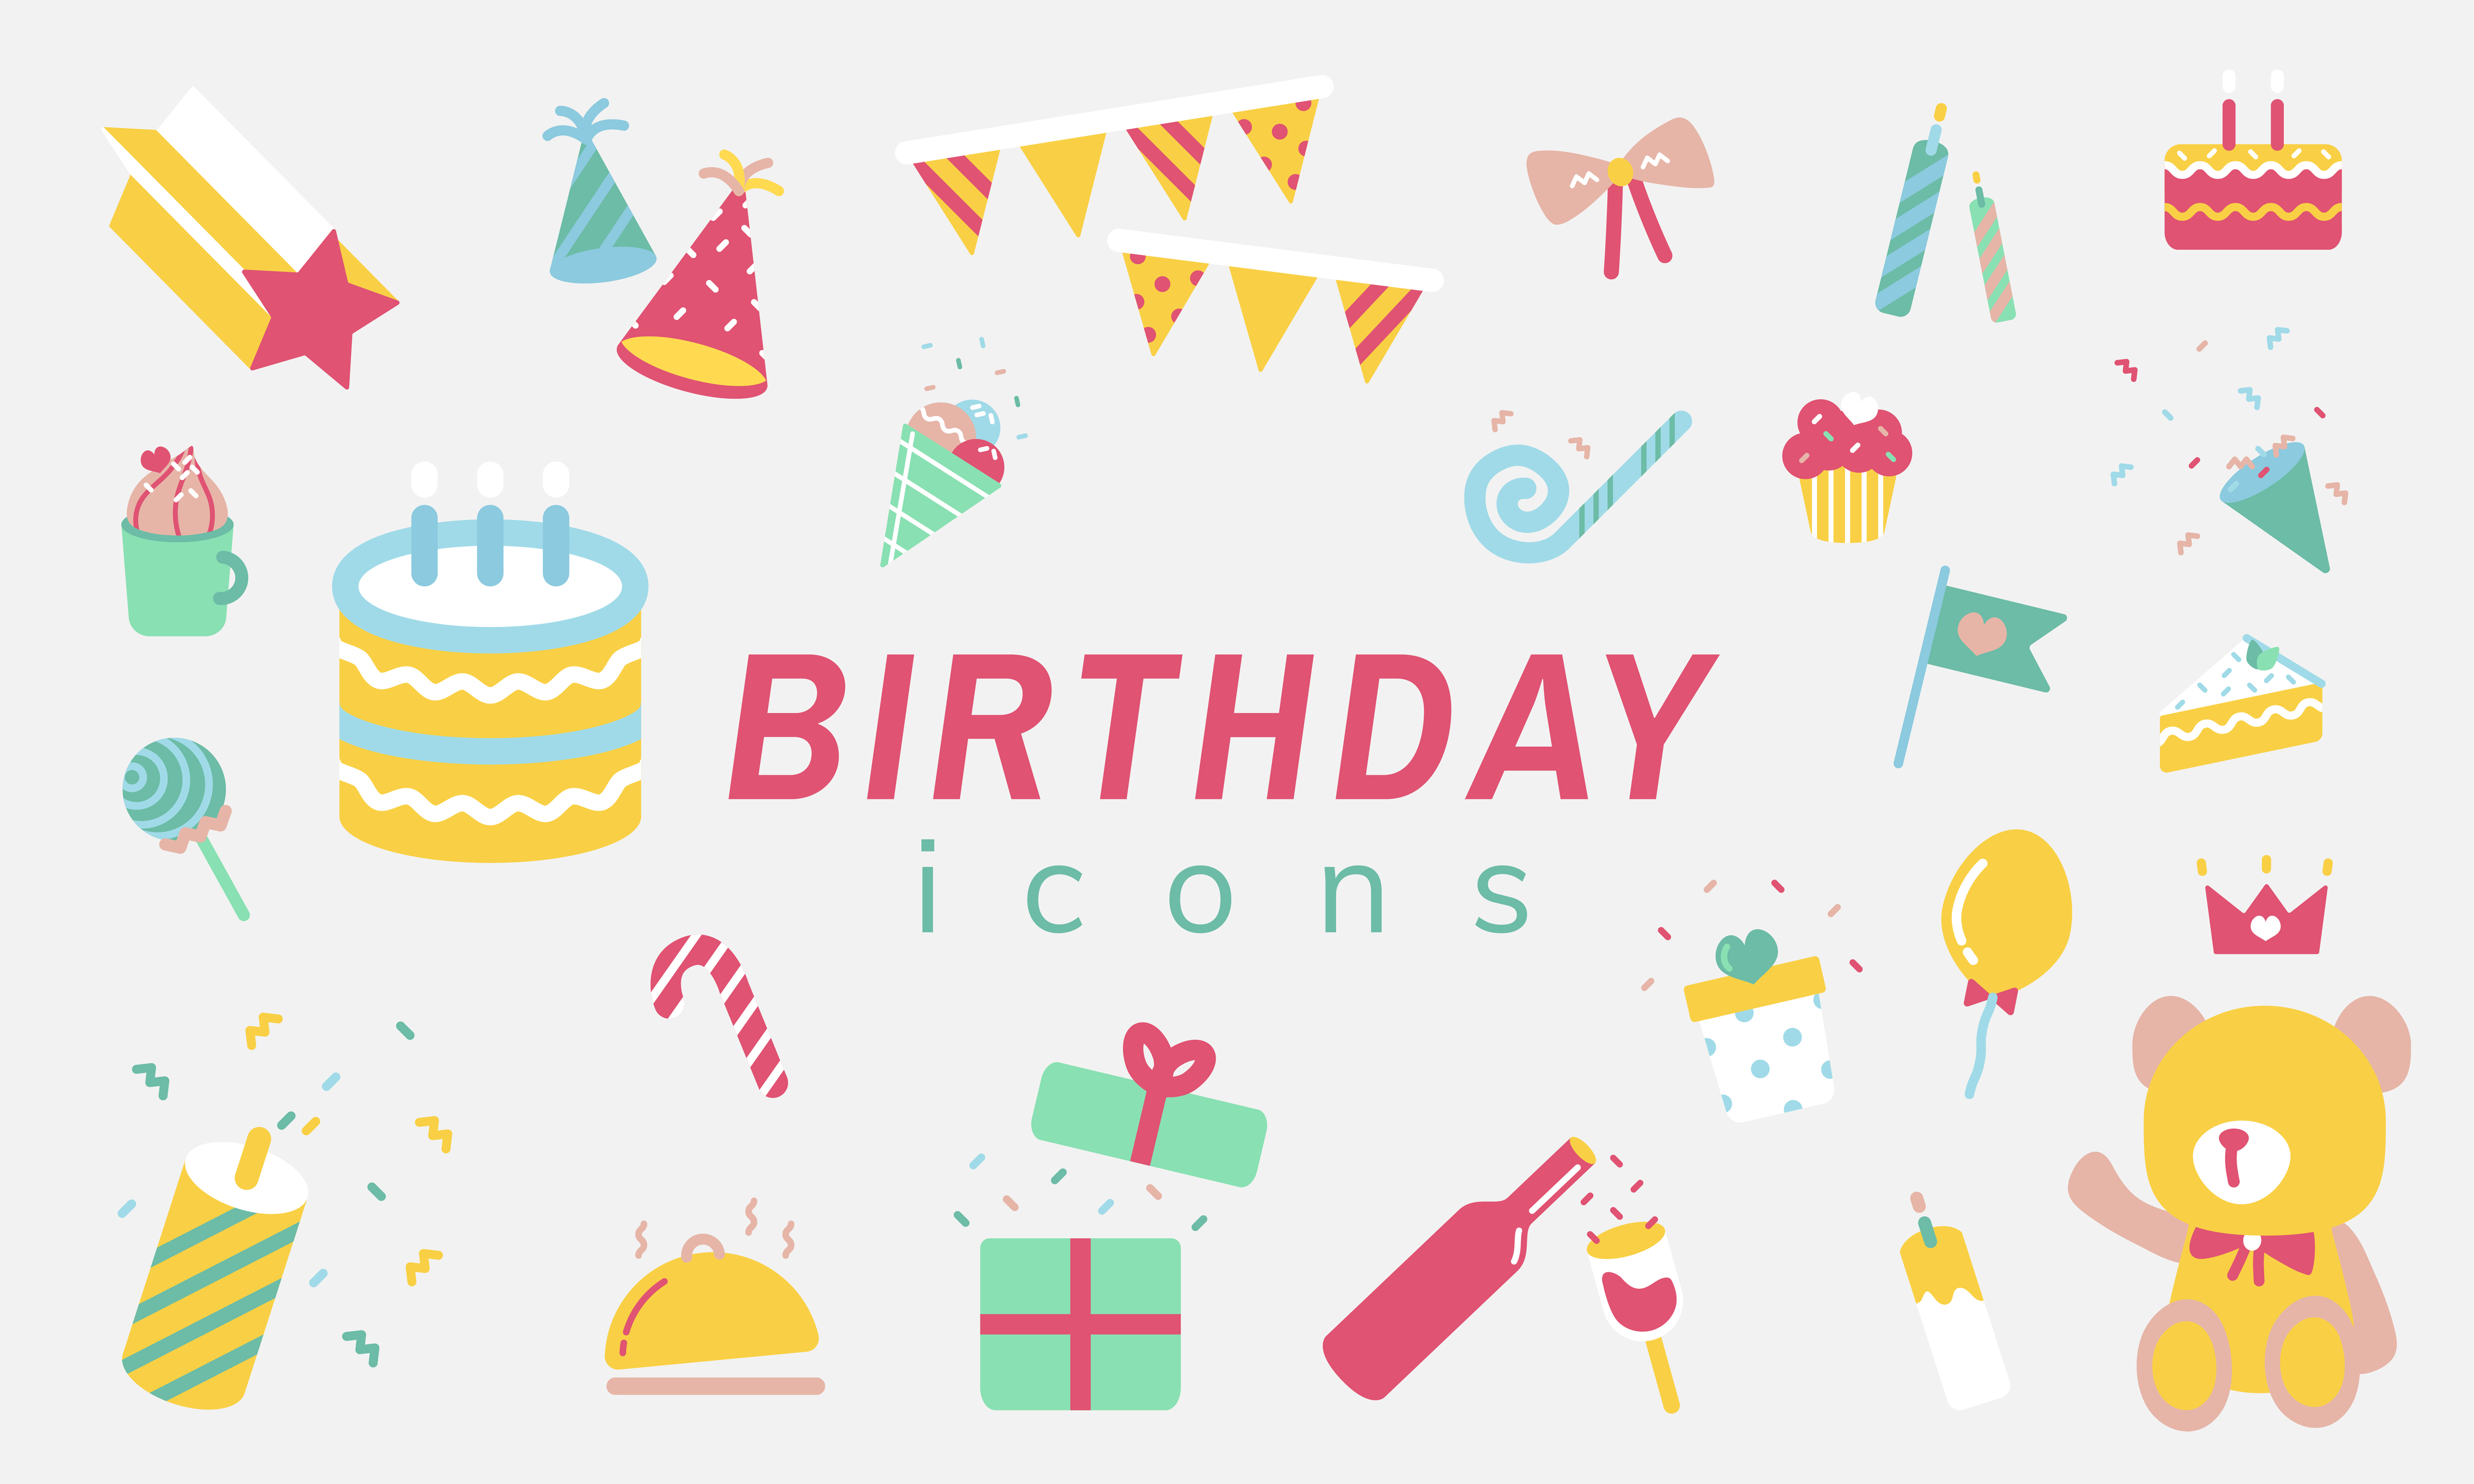 Download Illustration set of birthday icons - Download Free Vectors, Clipart Graphics & Vector Art